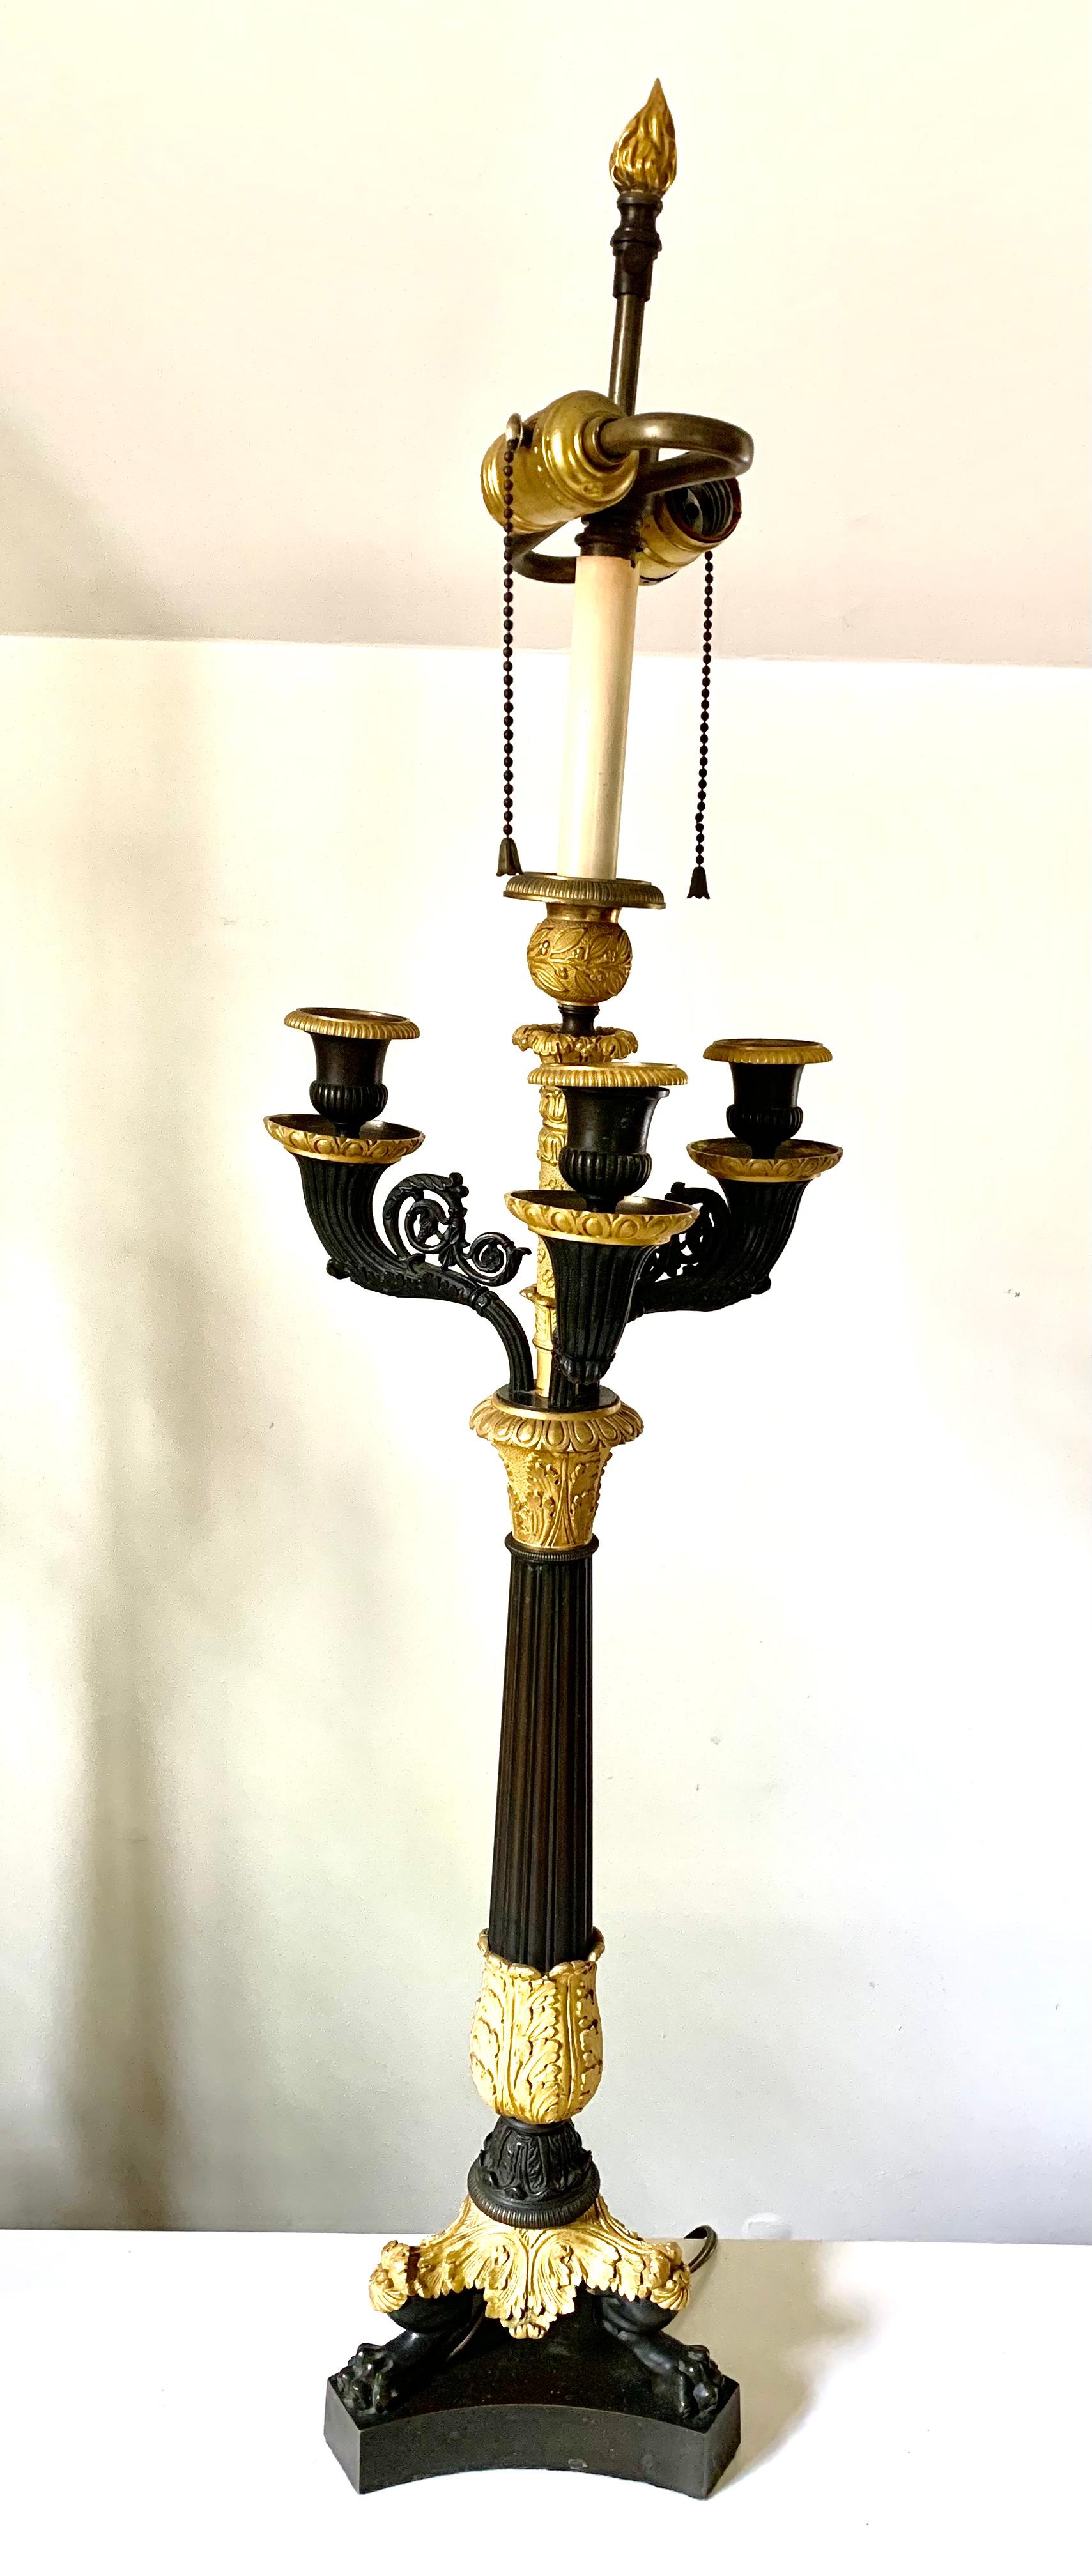 Pair Charles X Empire Period Gilt, Patinated Bronze Candelabra Lamps, circa 1830 For Sale 3